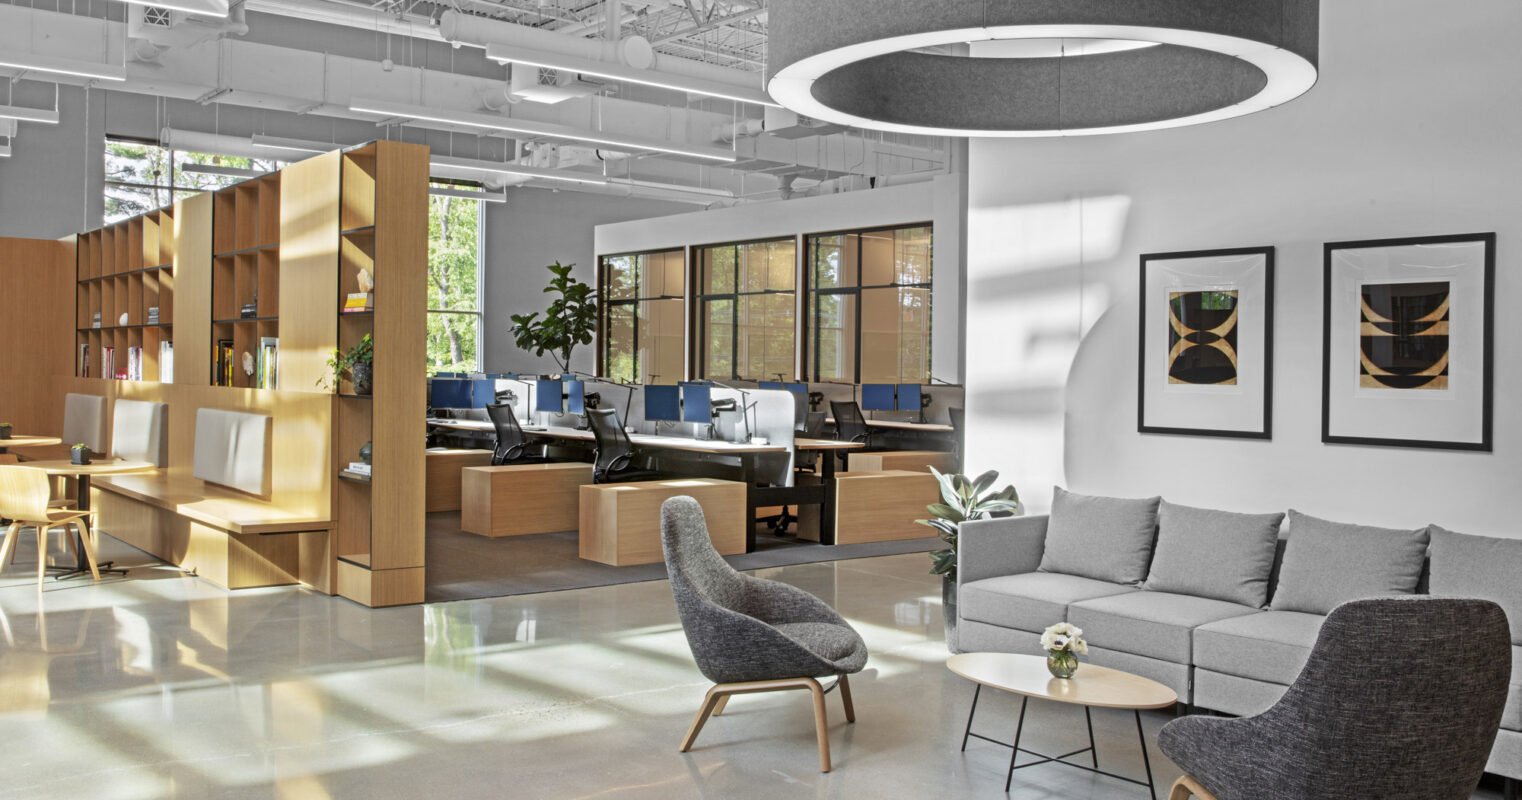 Modern office space featuring natural light; includes wooden cubicles, ergonomic chairs, a gray sectional couch, and circular overhead lighting. Two framed abstract paintings add a touch of sophistication to the clean, minimalist aesthetic.